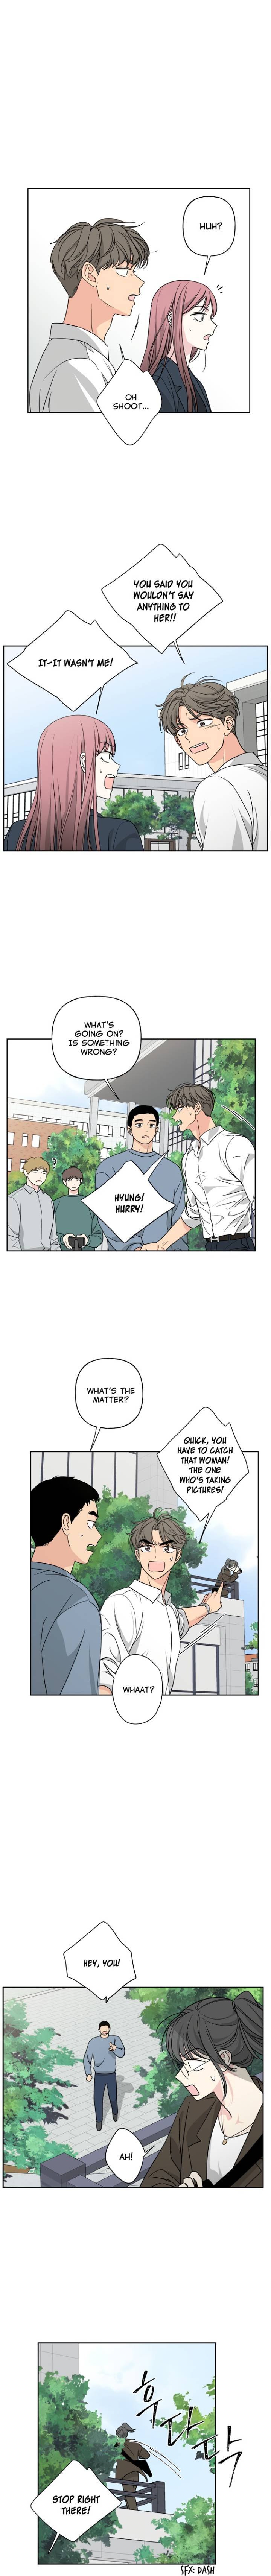 mother-im-sorry-chap-30-6